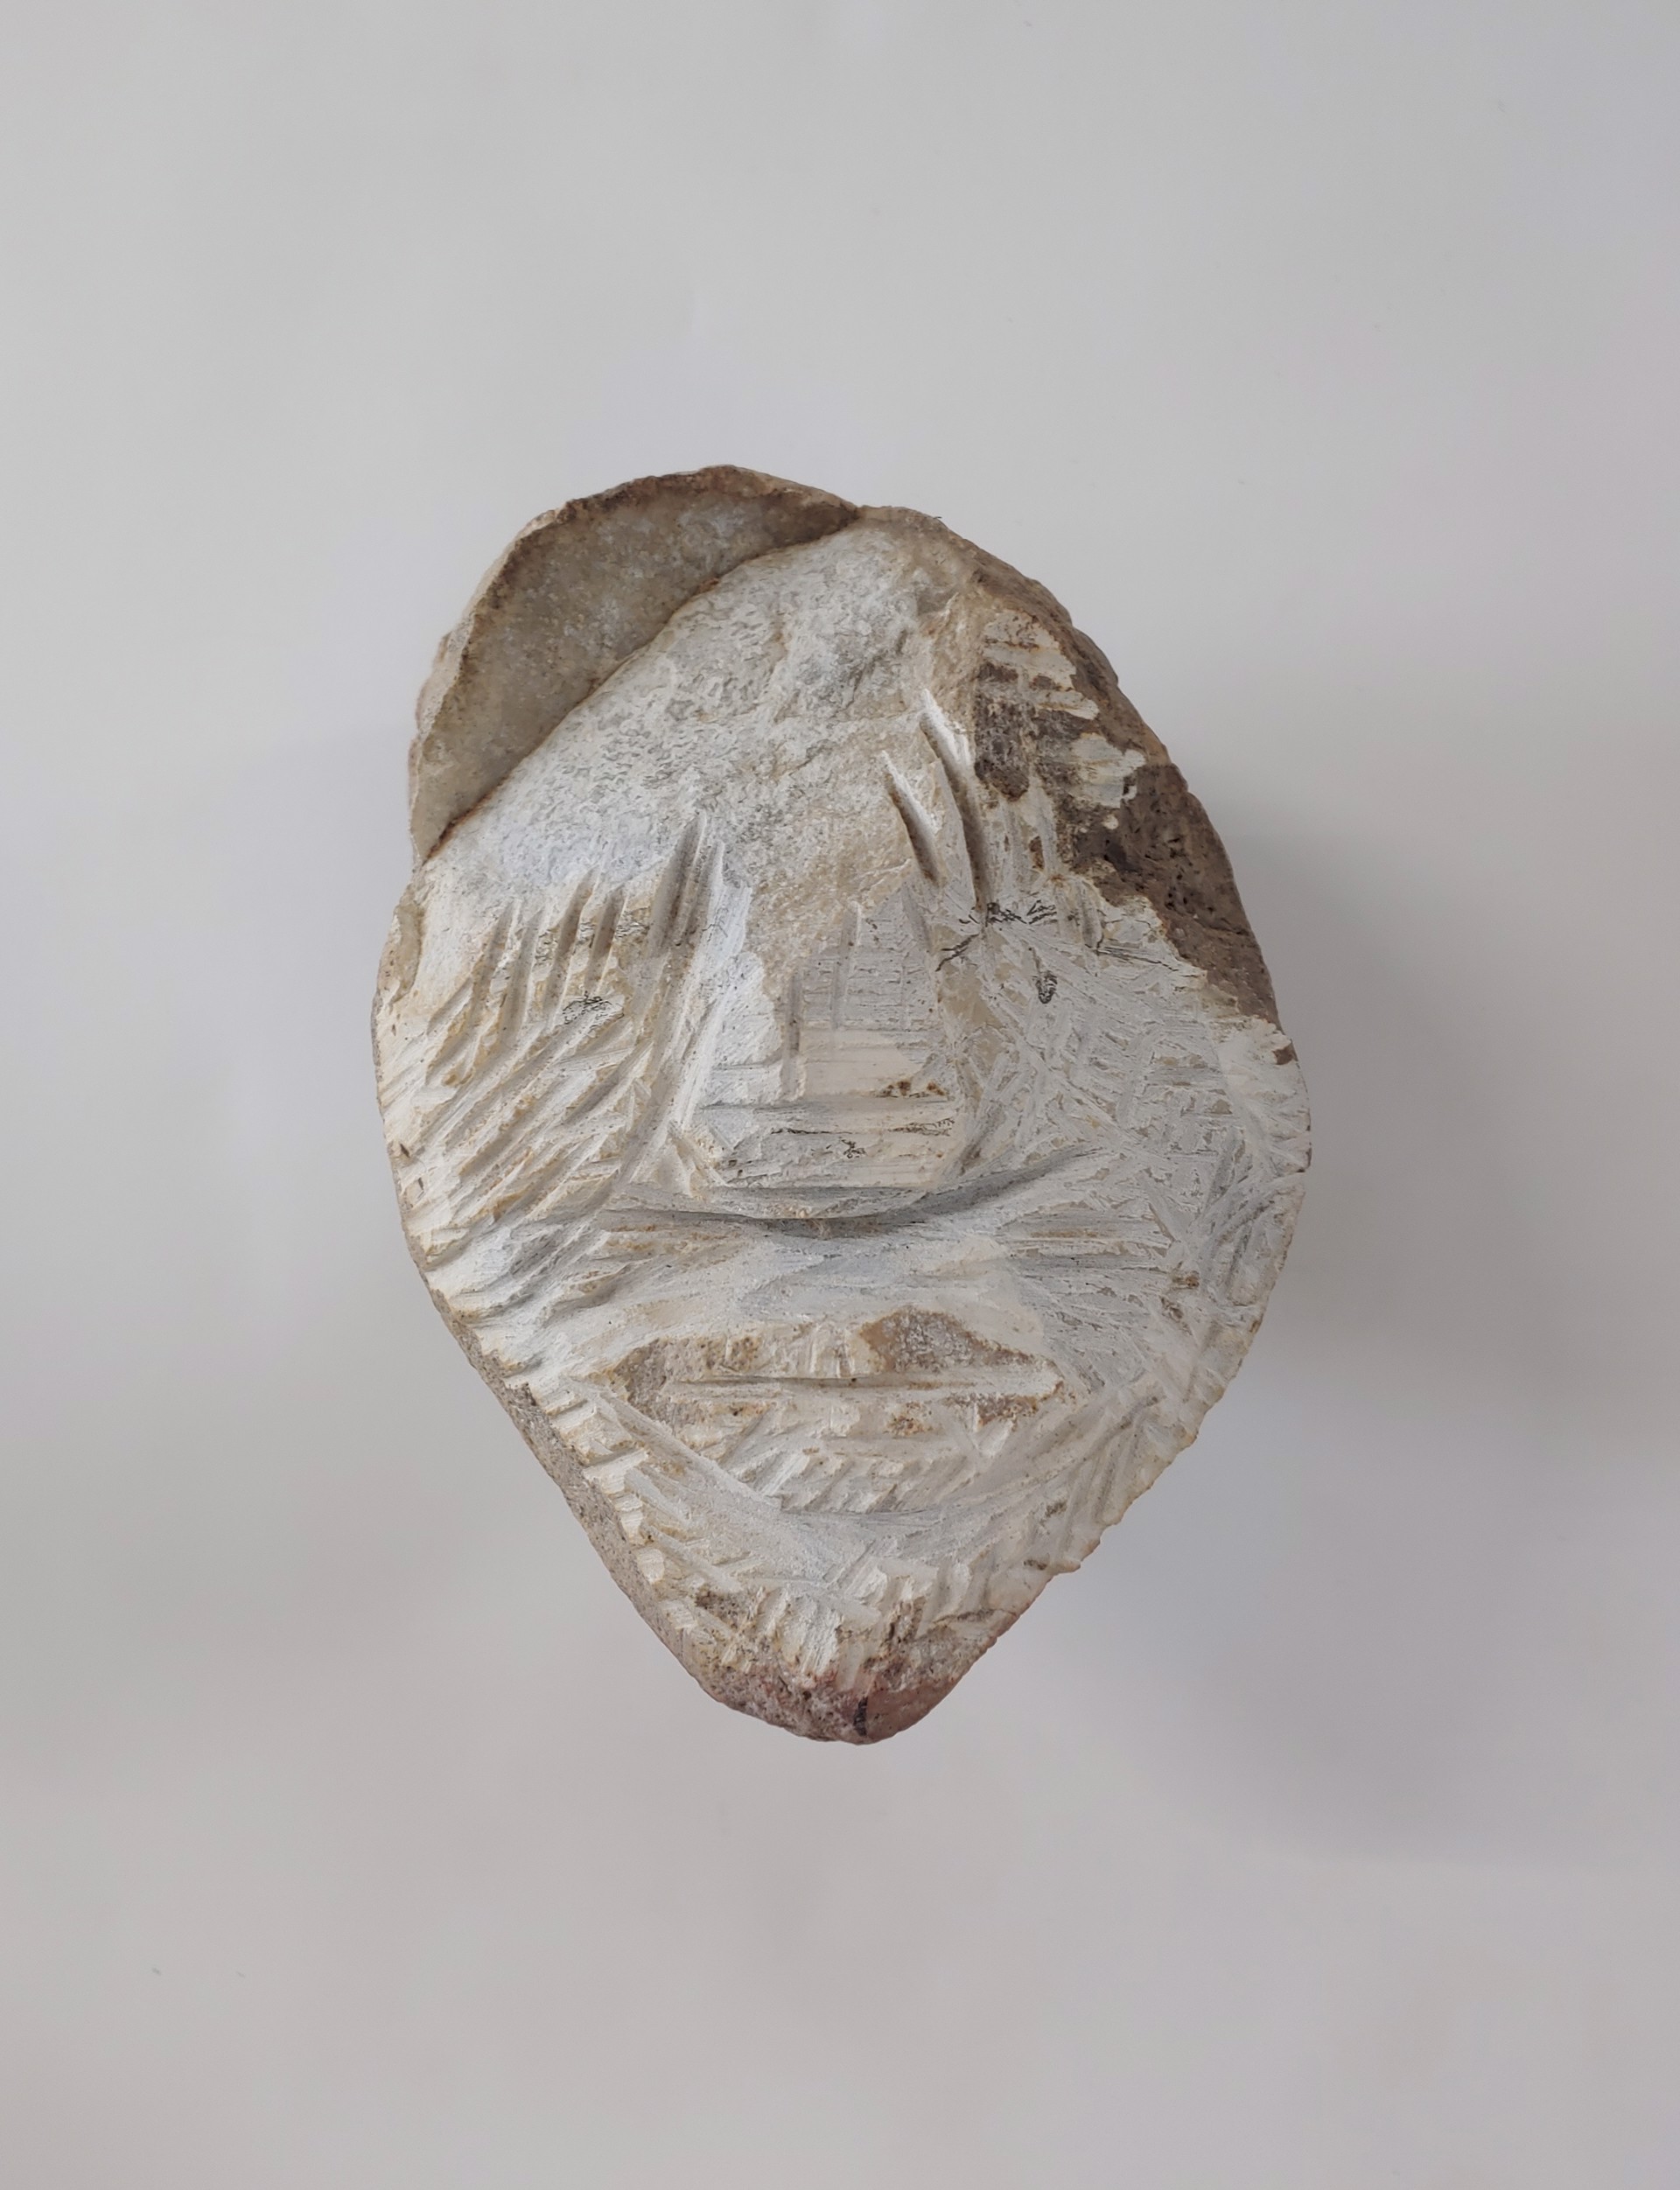 Rough Face - Stone Sculpture, unfinished by David Amdur